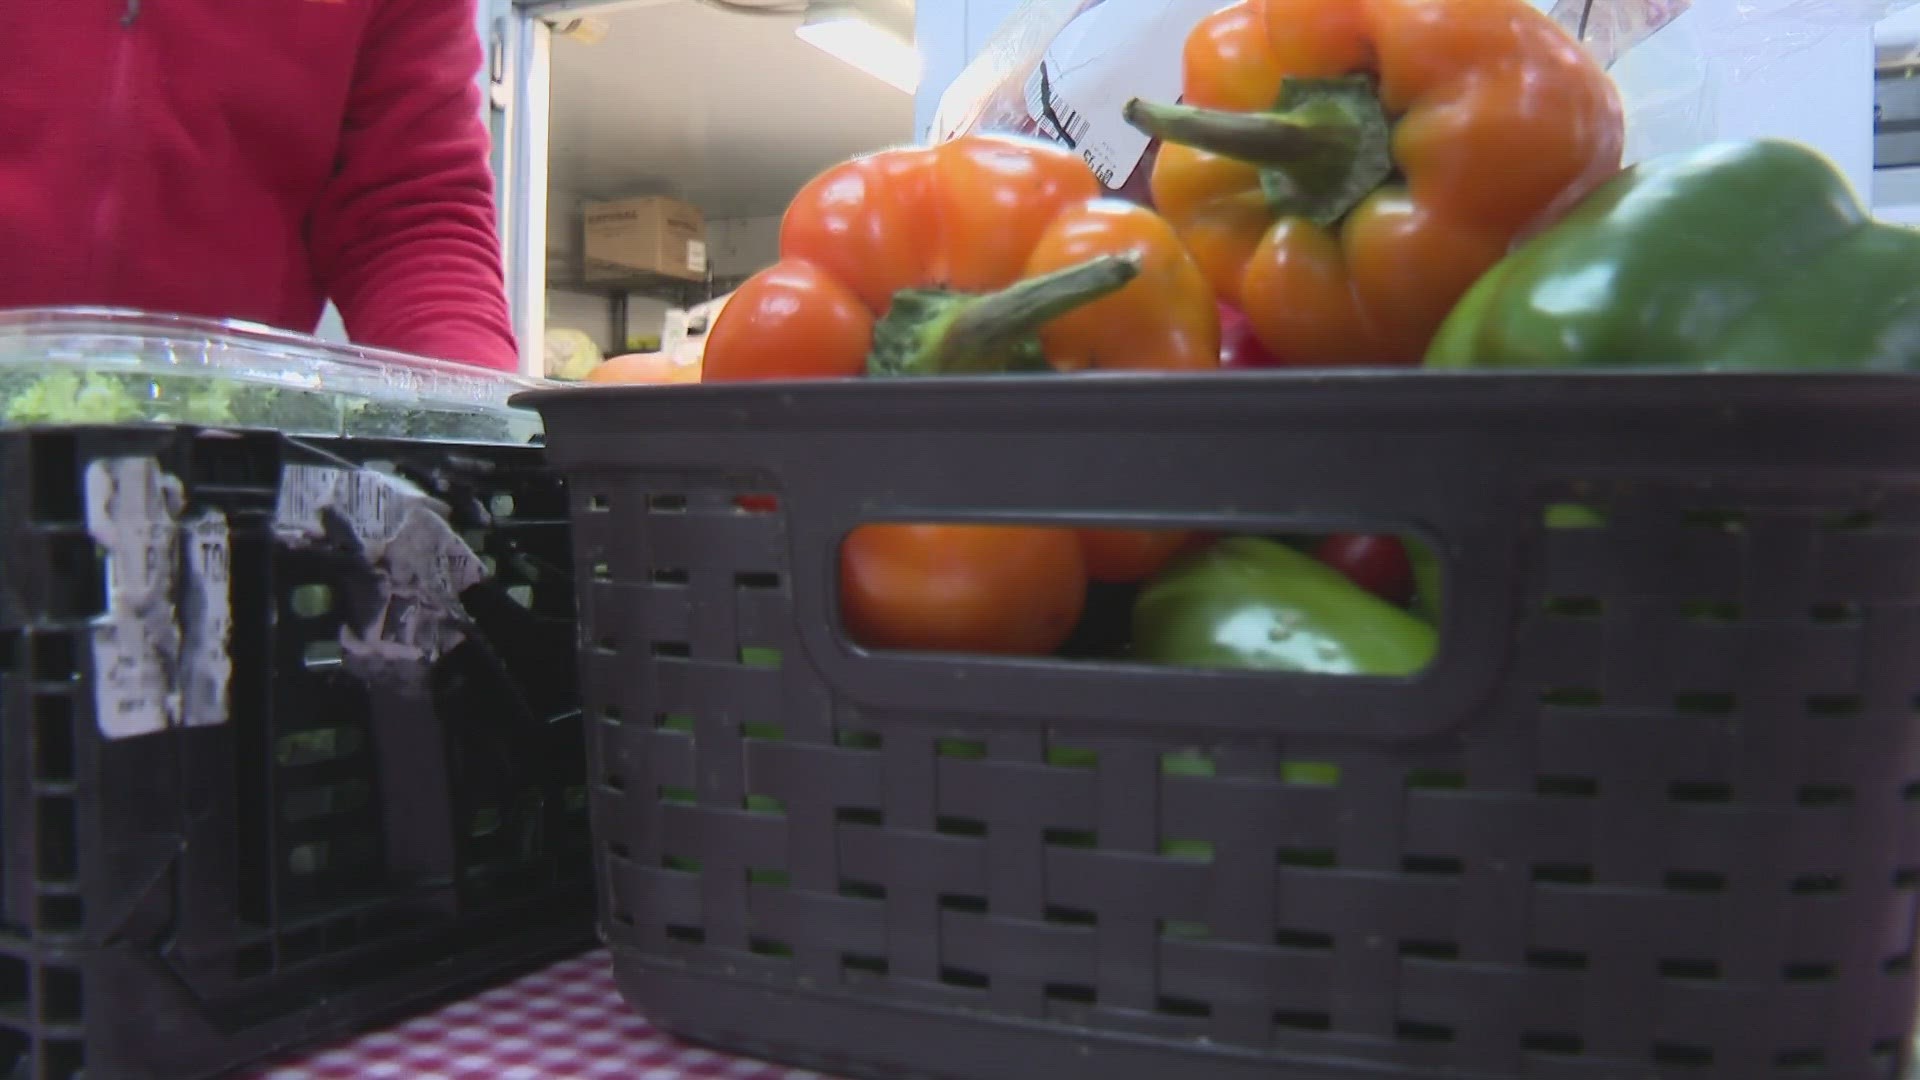 Organizations like the South Portland Food Cupboard reported seeing more folks needing food after emergency SNAP benefits ended on March 1.